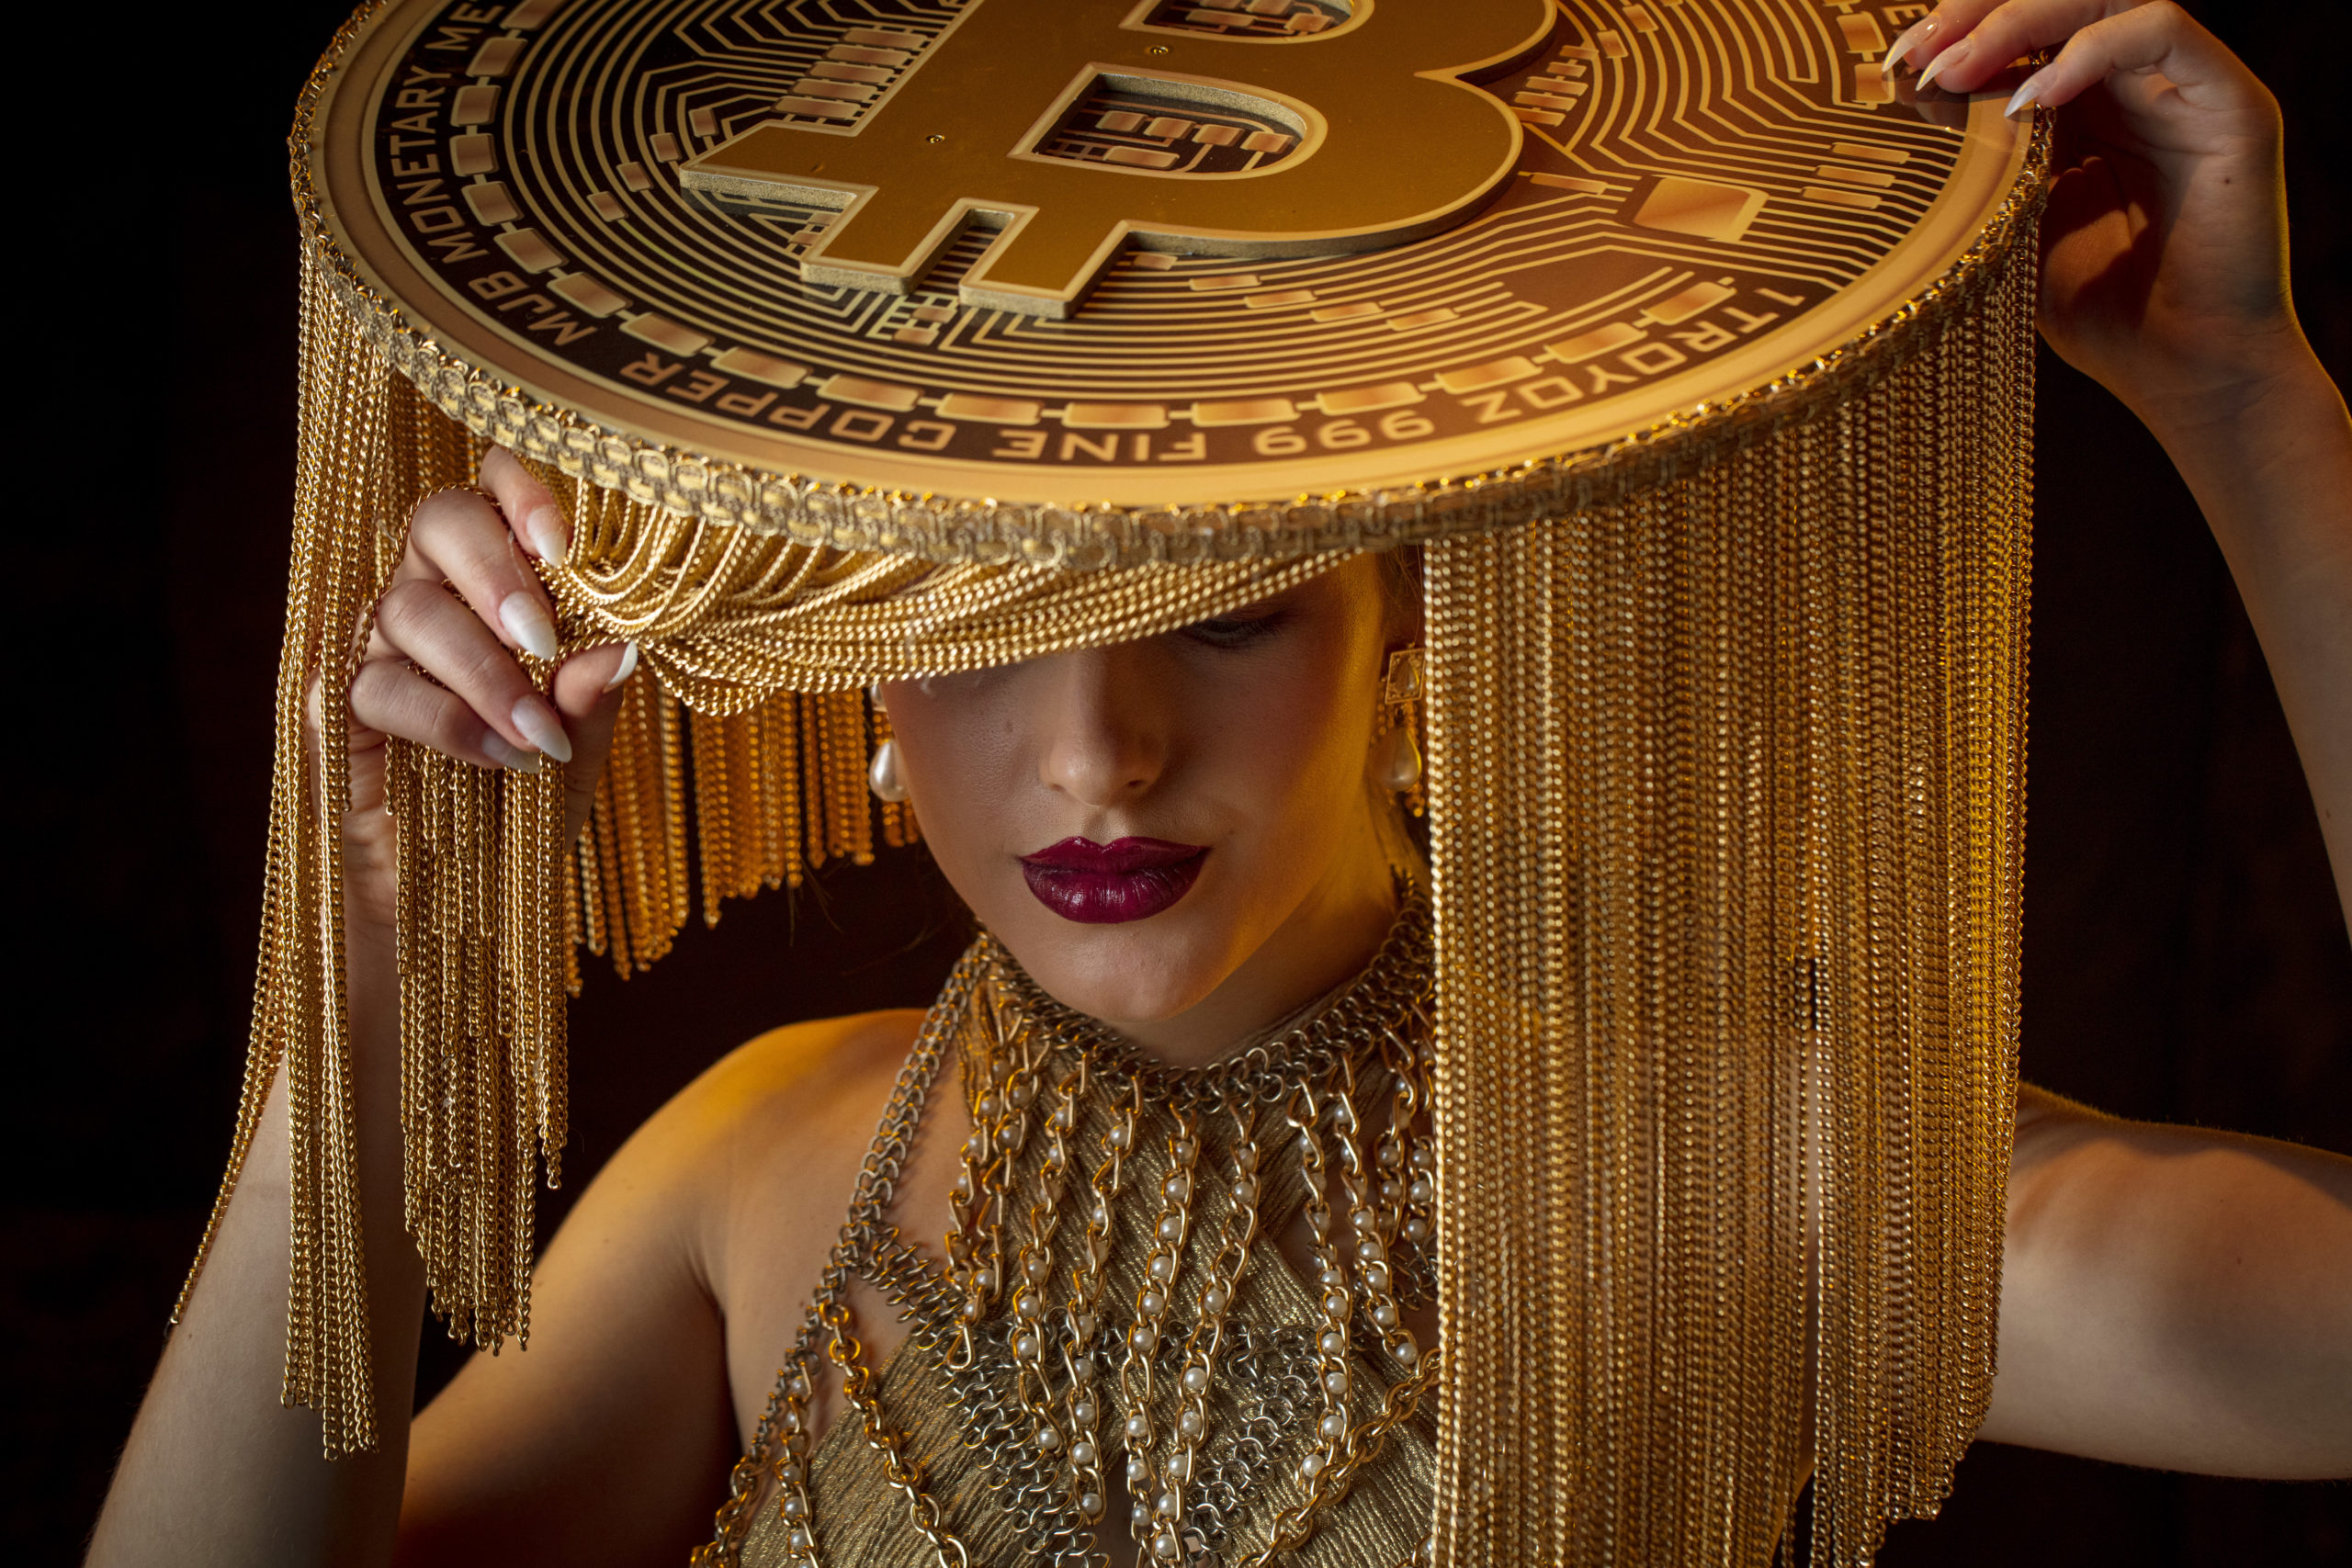 Miami Restaurants and Hotels Accepting Bitcoin During NFT Week + Bitcoin Conference 2022